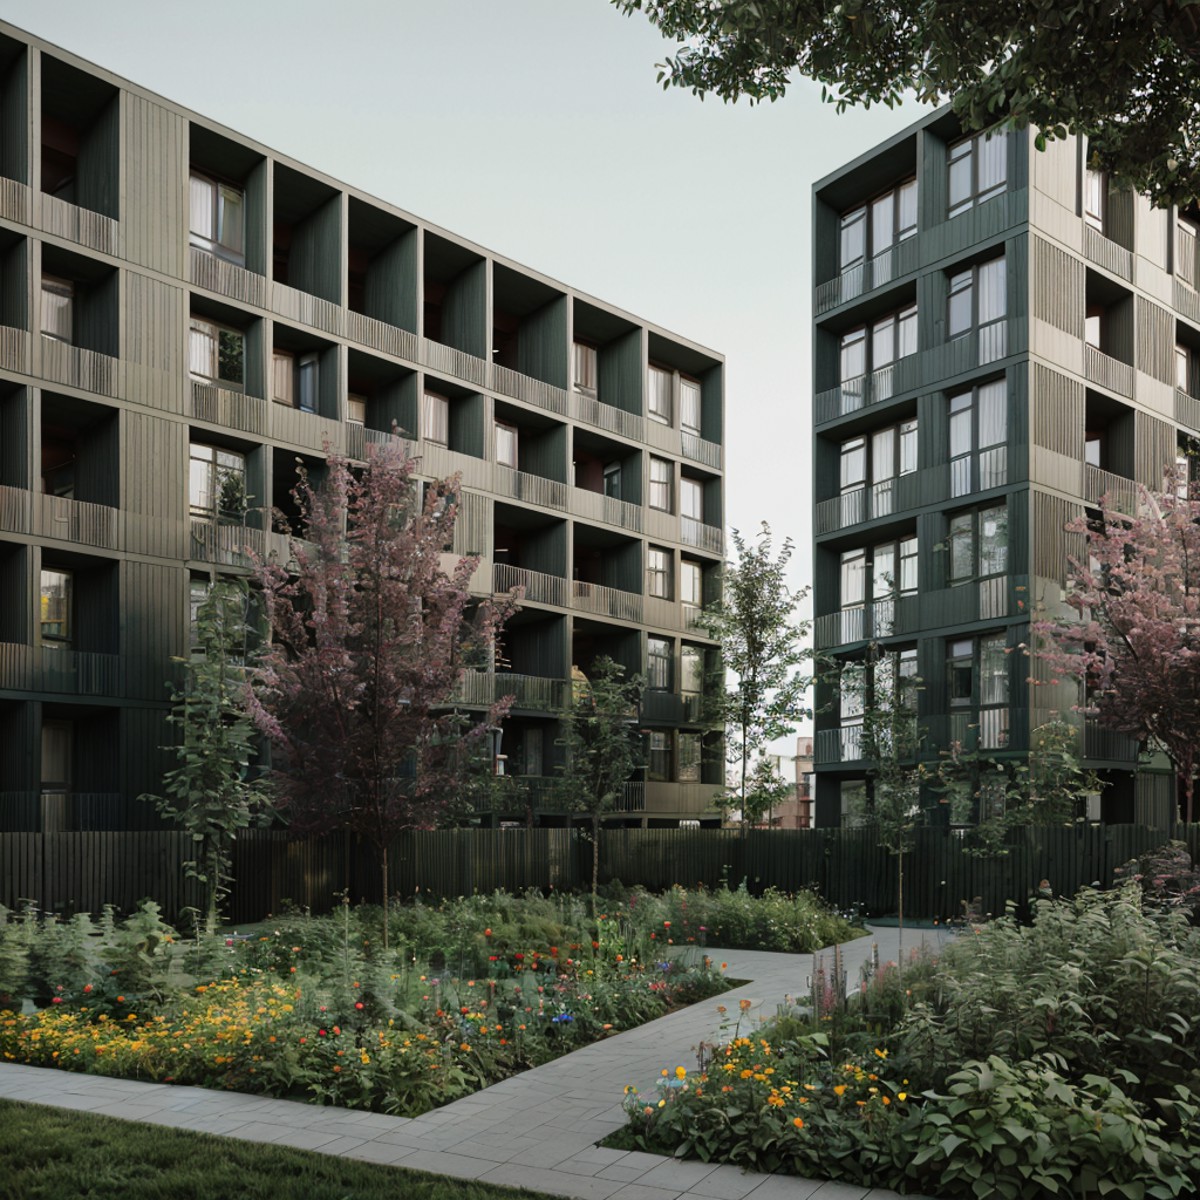 RAW photo of a co-housing residential complex, common garden, 1man, flower, bush, render, matte colored facade, entire bui...